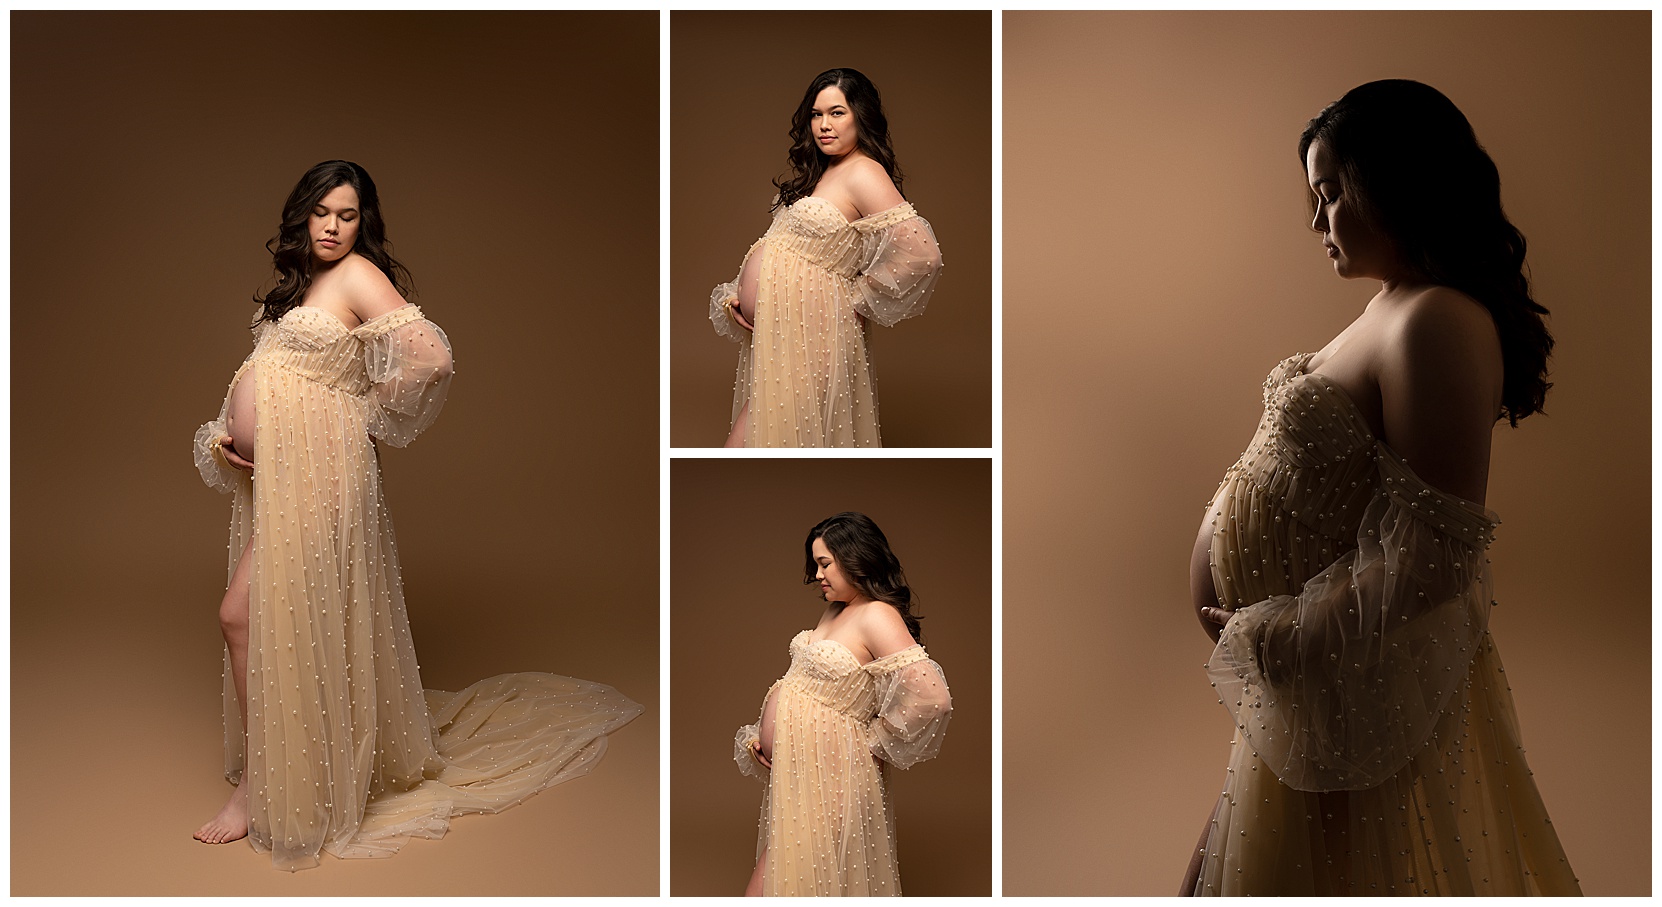 Montage featuring four full color maternity photos of one woman in a cream colored maternity gown. Woman is standing in different side-facing poses.